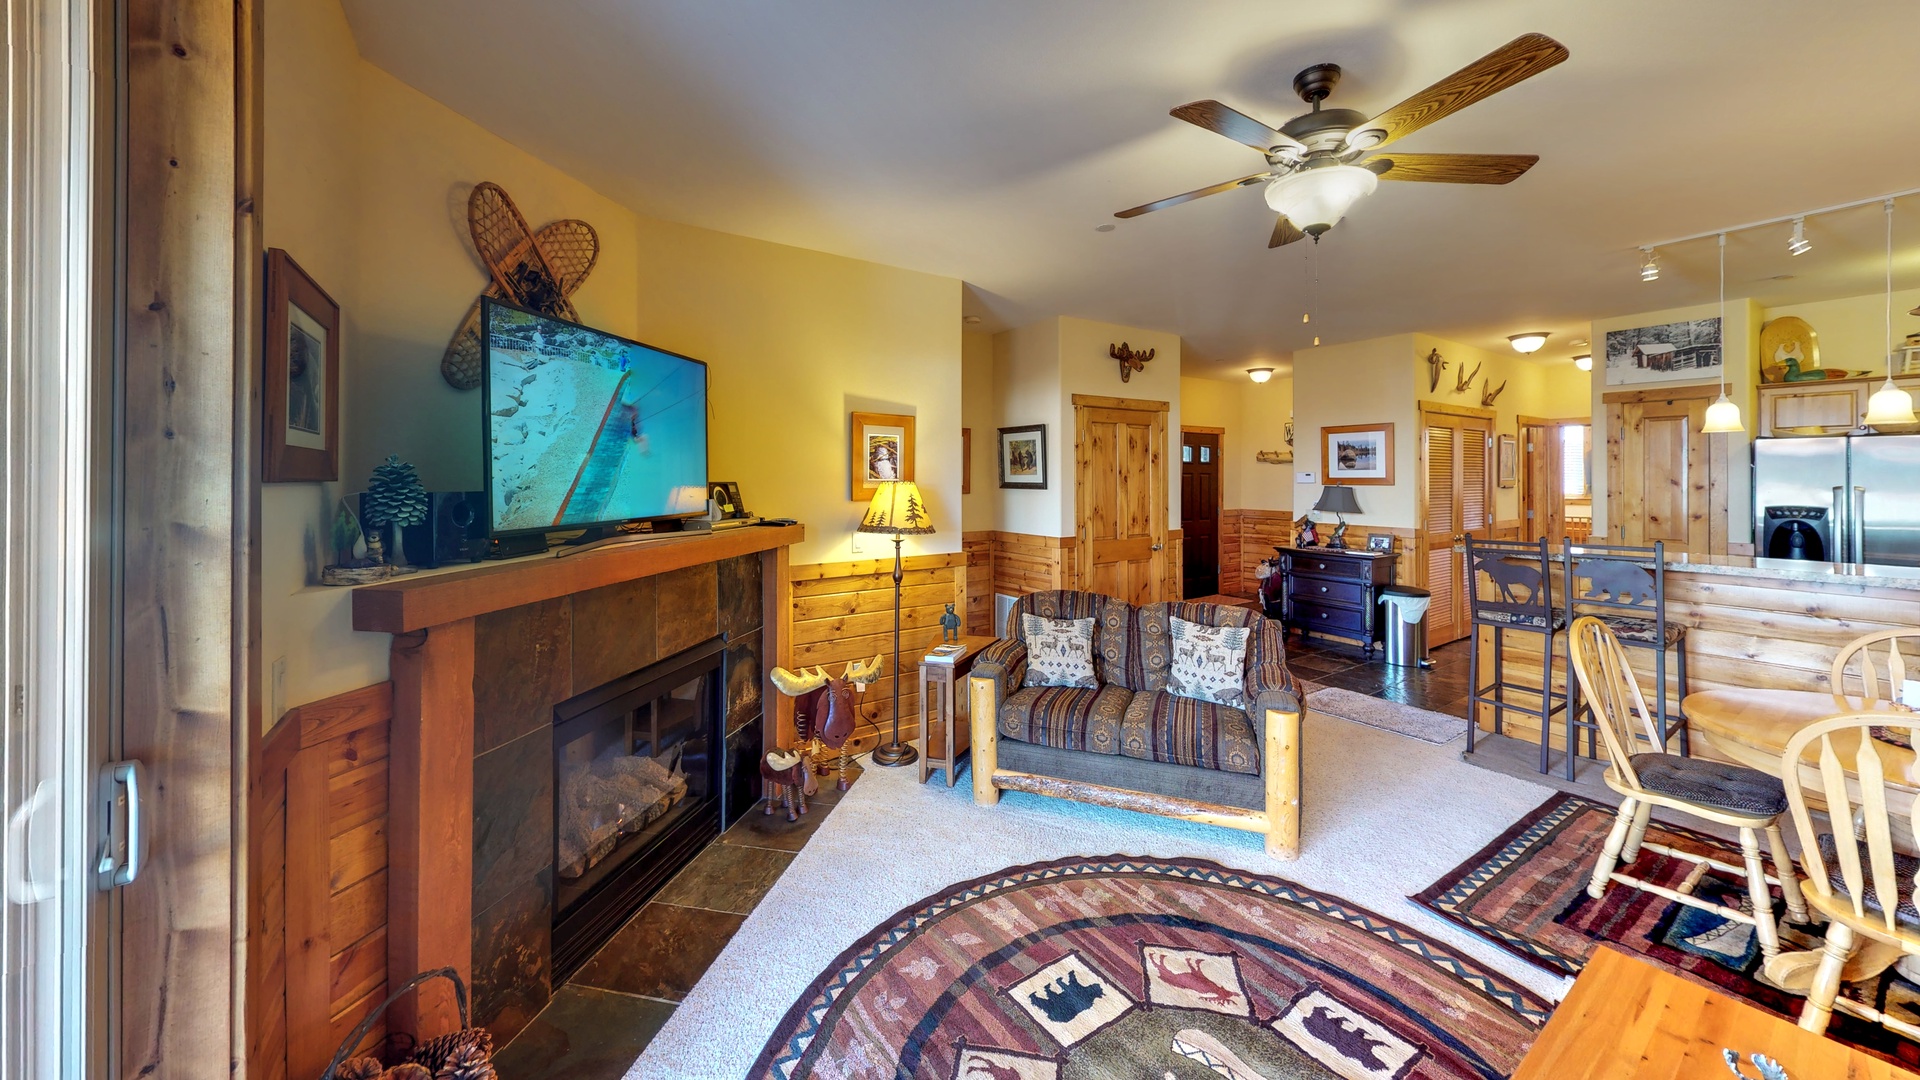 Living room with nearby kitchen and door to deck and nearby kitchen: Truckee Cinnabar Vacation Retreat